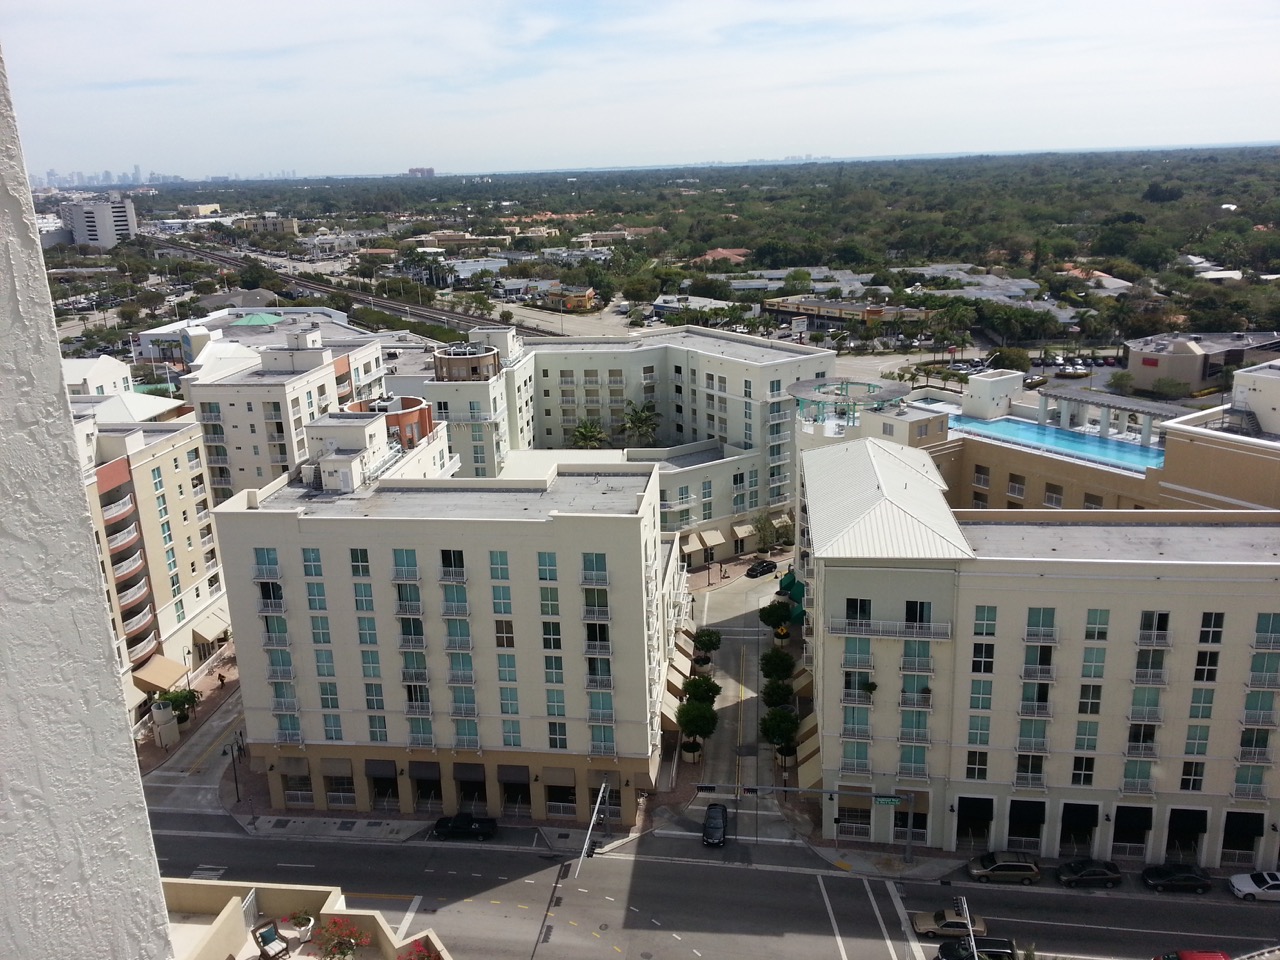 Dowtown Dadeland Apartments Arial Image